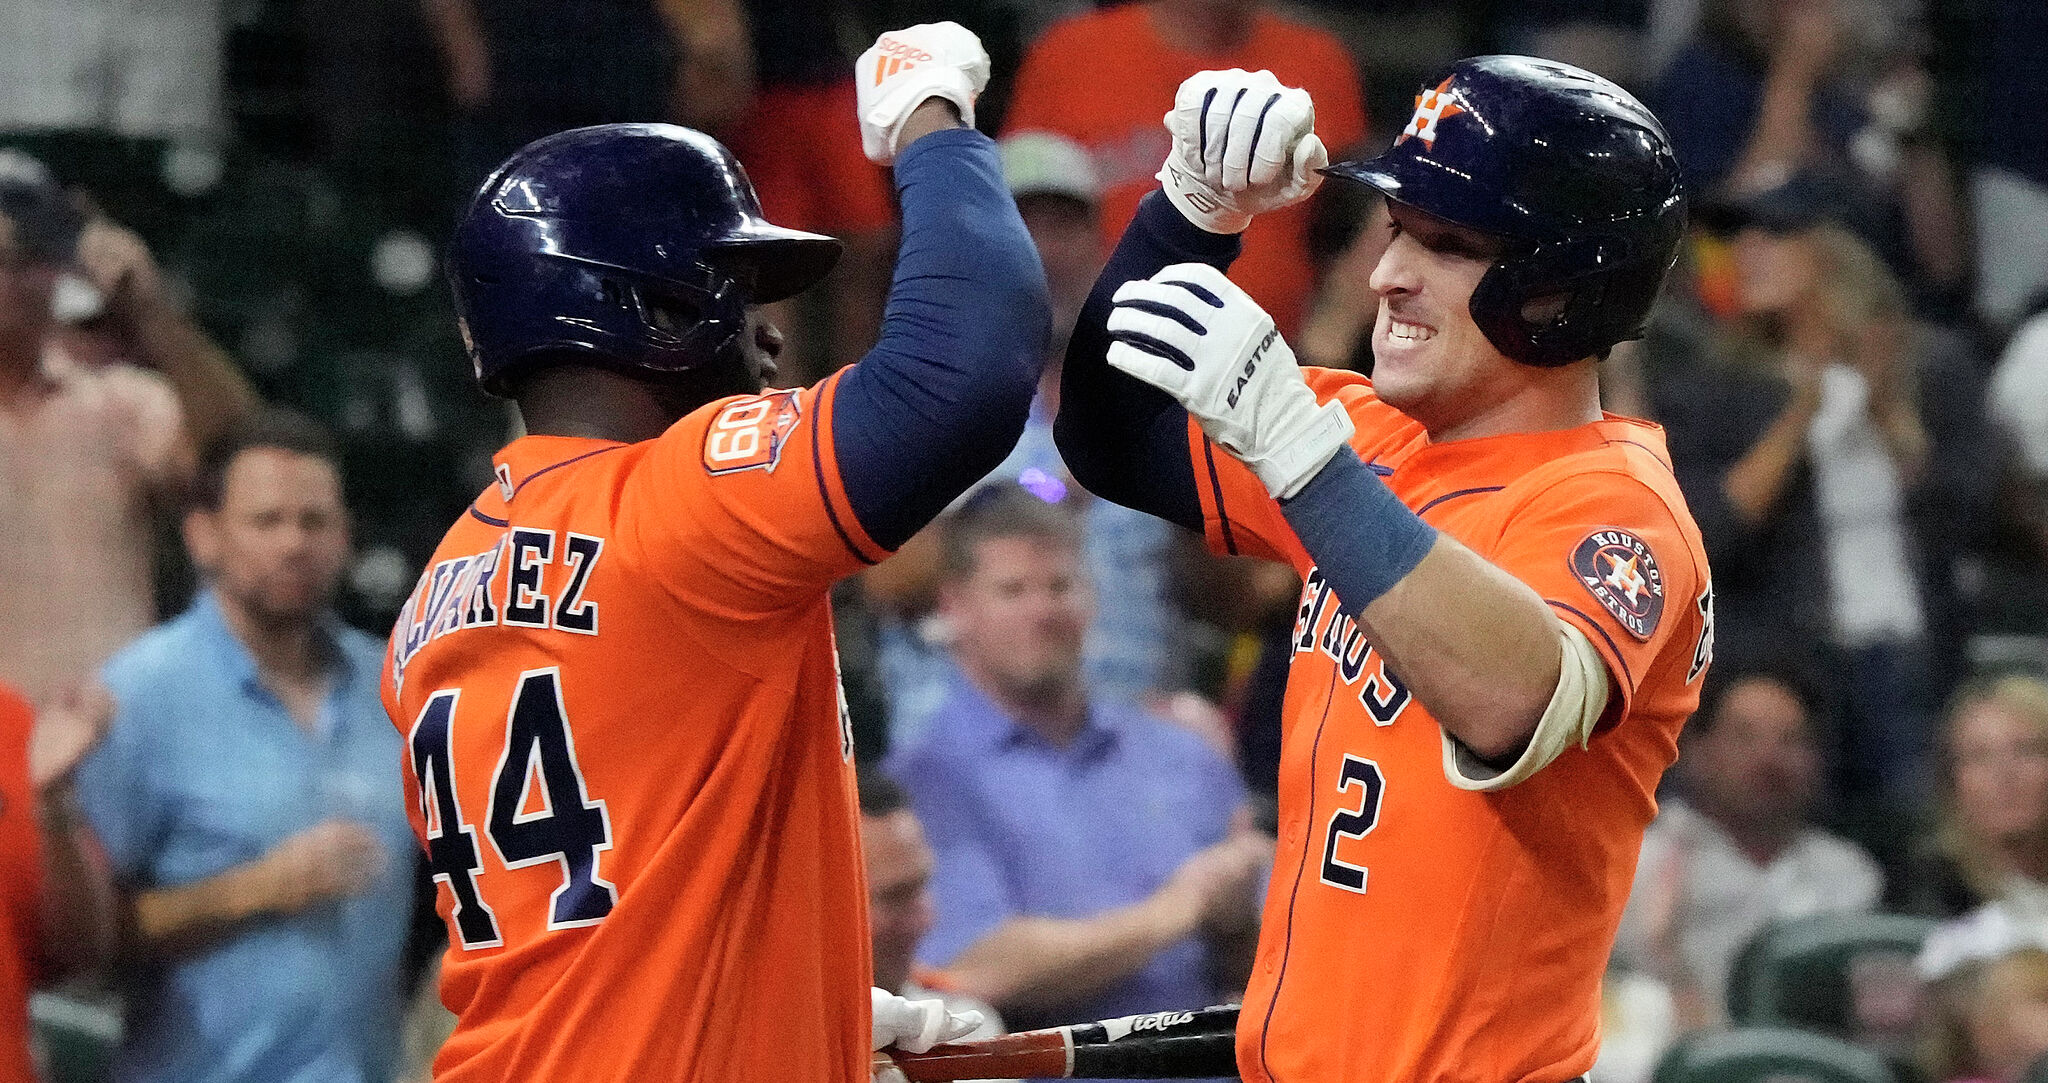 MLB on X: The @Astros need just 4 more wins. #WorldSeries https